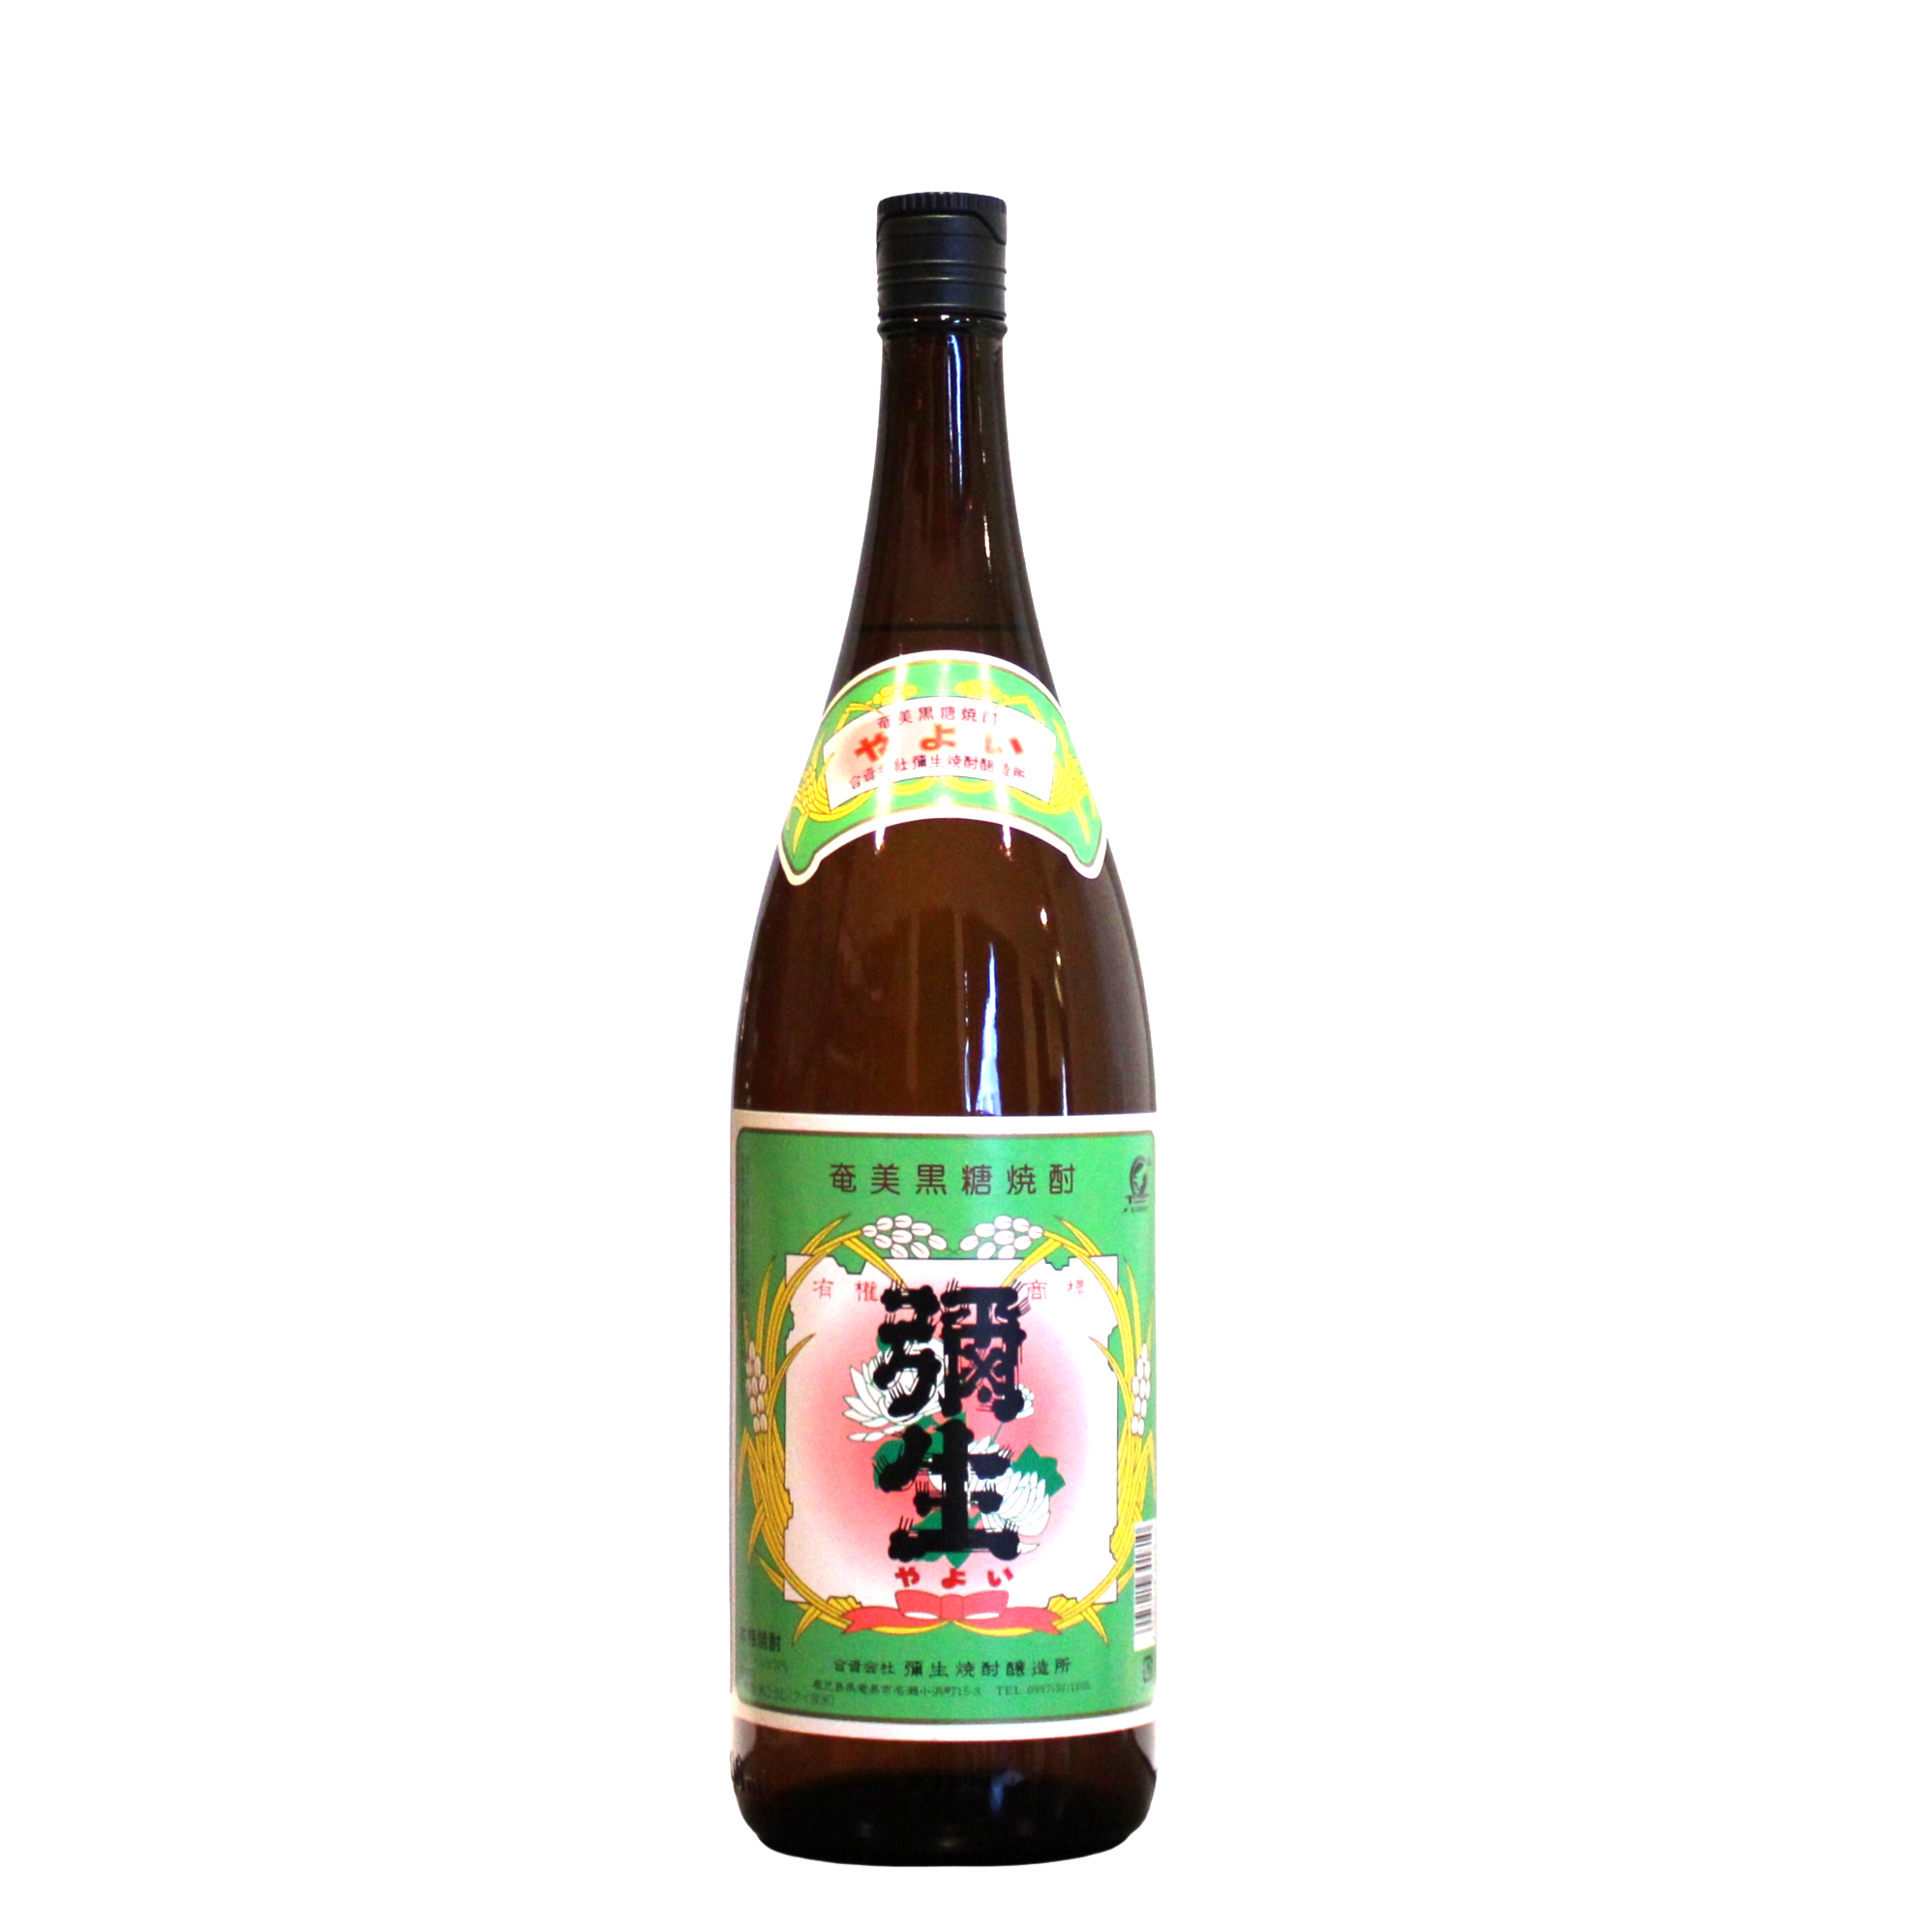 Yayoi Shochu Brewery, founded in 1922, is the oldest brewery in Amami Oshima. The representative label of Yayoi series. It deliver a host of flavours on your palate starting with a gentle sweetness and umami notes through the mid palate. You can casually enjoy it with any kind of meal.